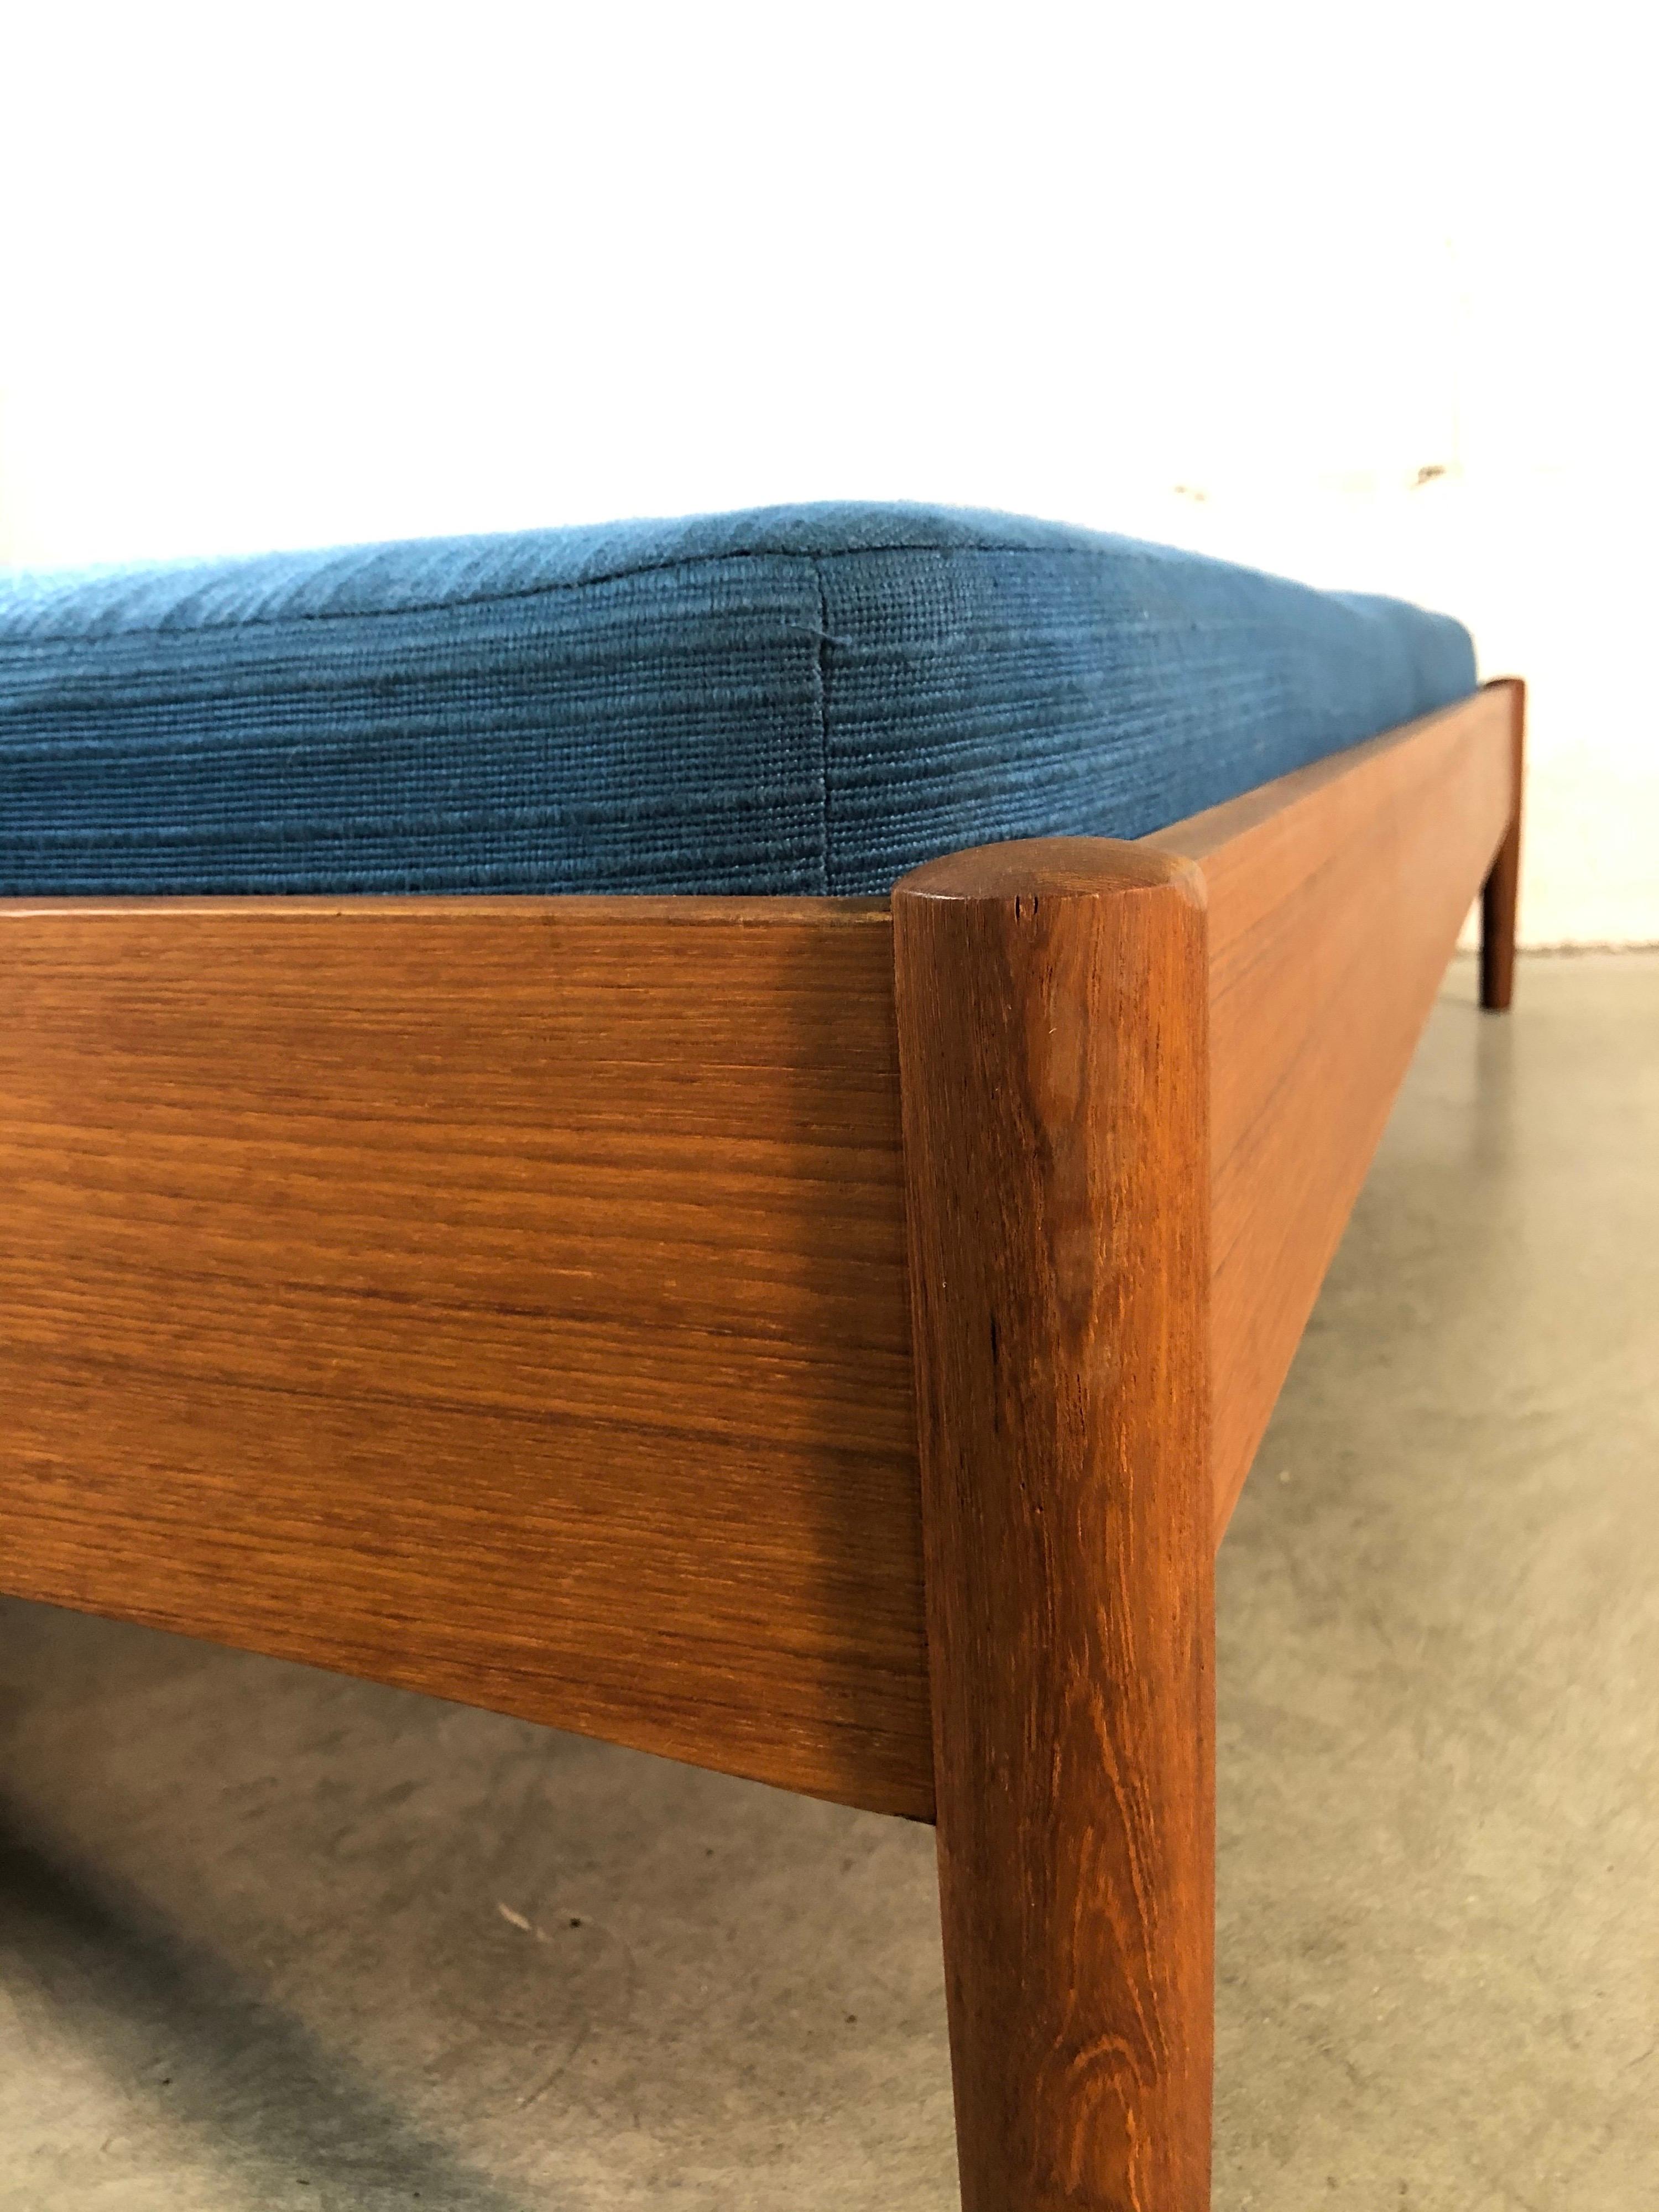 Vintage 1960s Danish teak daybed by Dyrlund. The bed is on a solid teak frame with the original fabric mattress. Very sturdy and in refinished condition. Marked with a label.